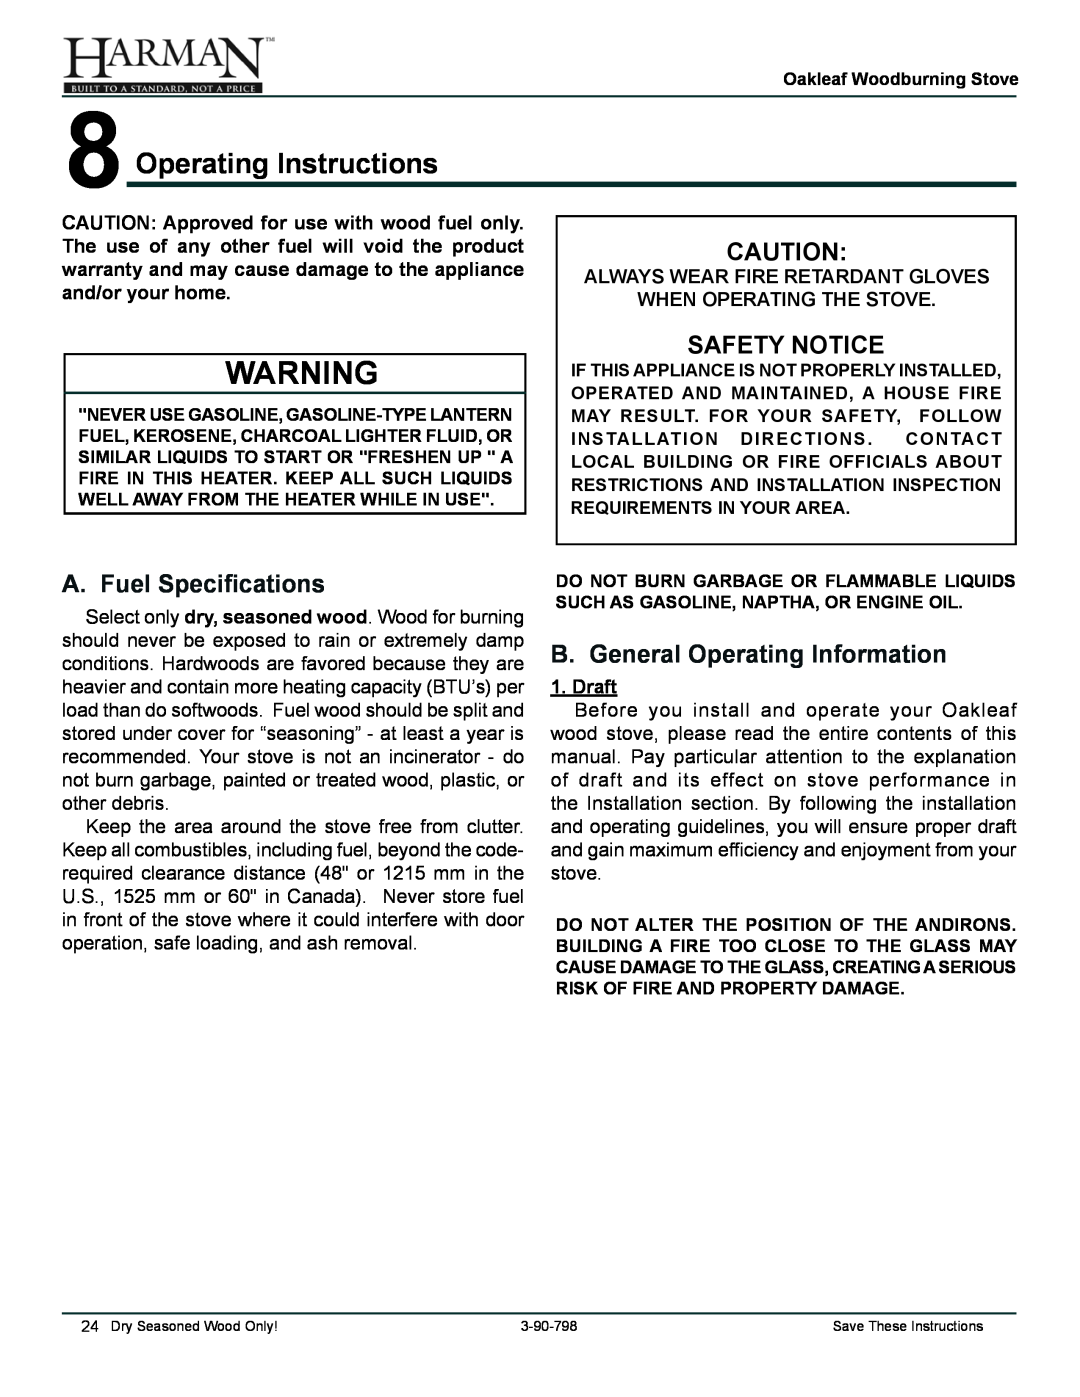 Harman Stove Company 1-90-79700 8Operating Instructions, A. Fuel Specifications, Safety Notice, when operating the stove 